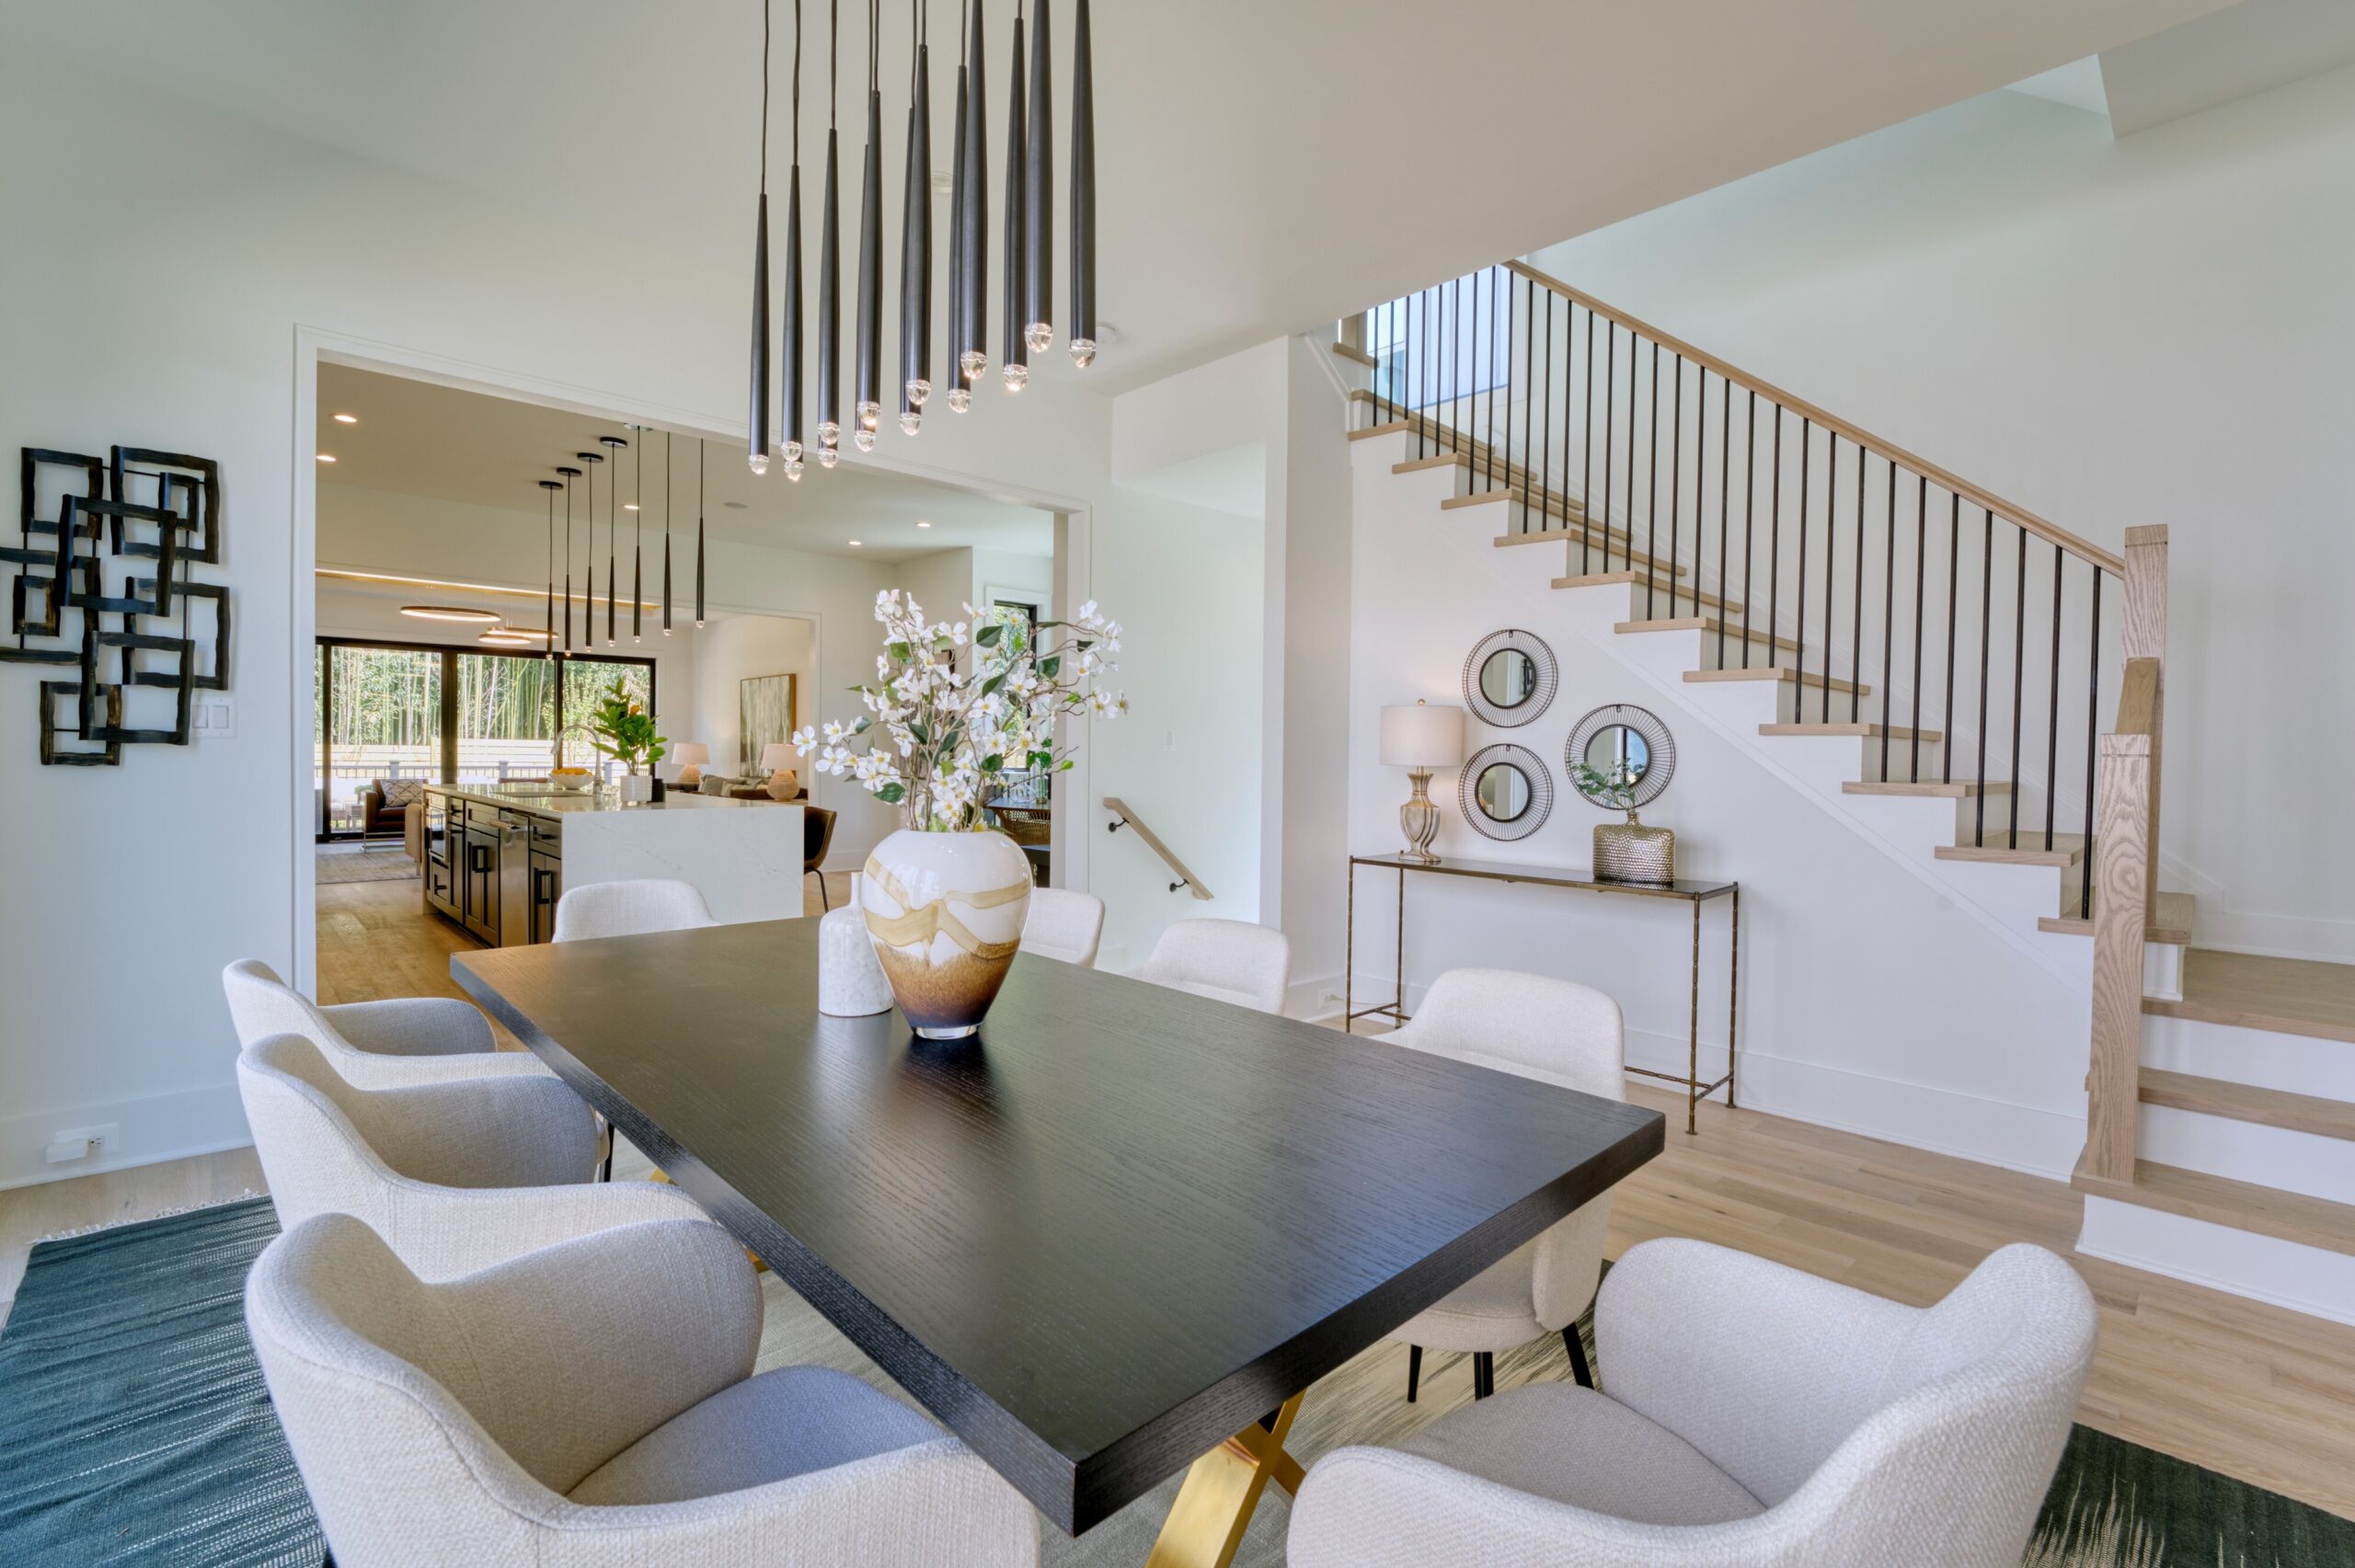 Professional interior photo of 1137 Buchanan St in McLean, VA - showing the formal dining area at the front of the home next to the staircase to the upper level and kitchen visible in the background